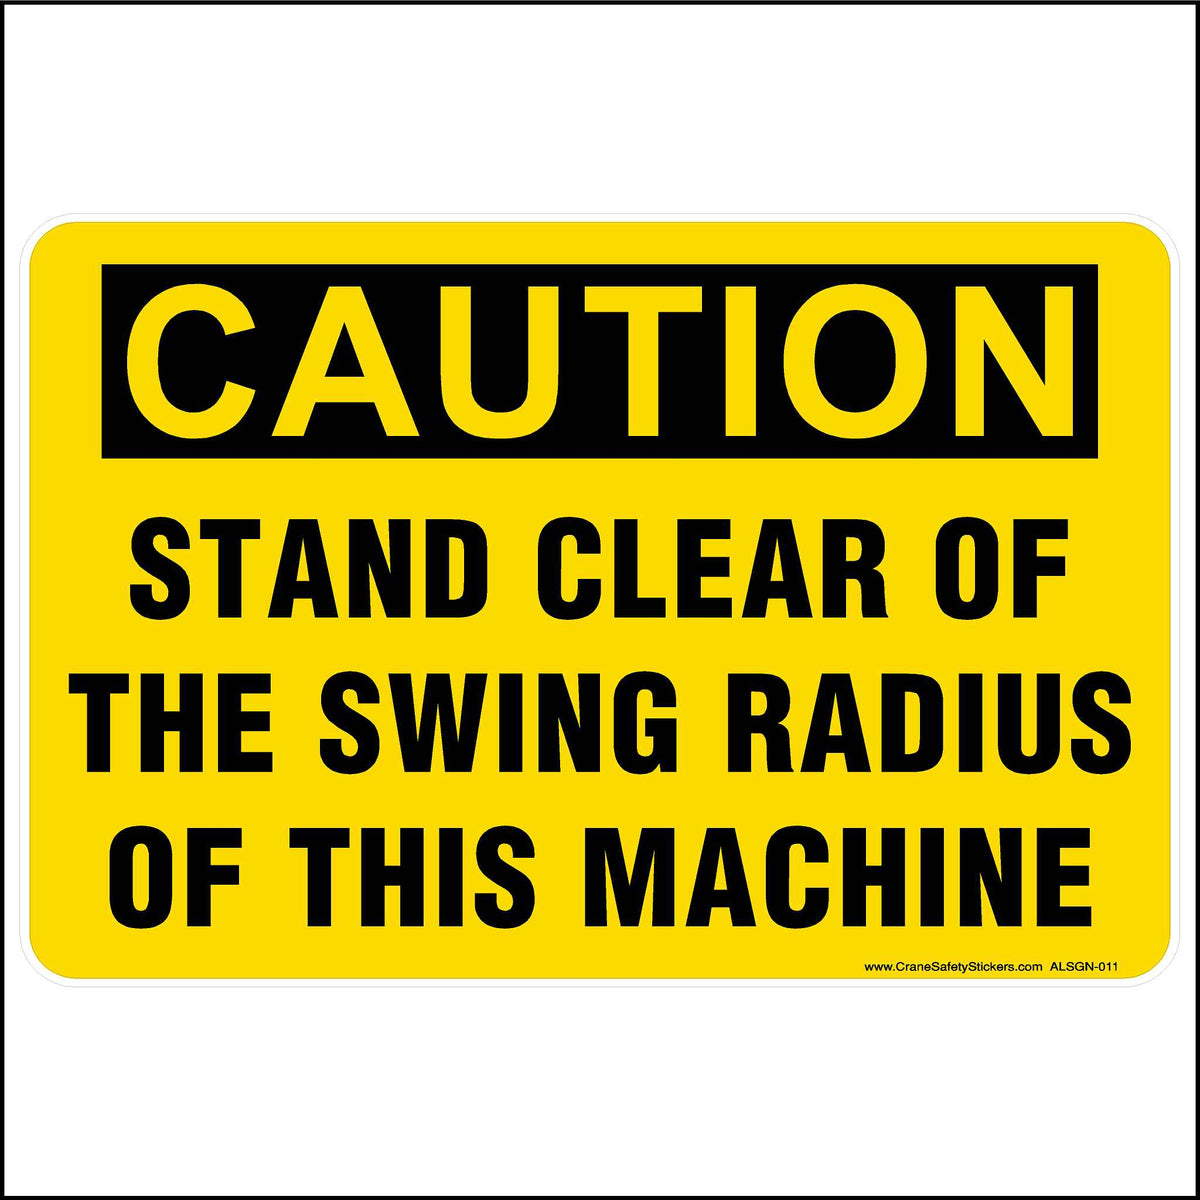 Caution, stand clear of the swing radius of this machine. ANSI Yellow and black print.